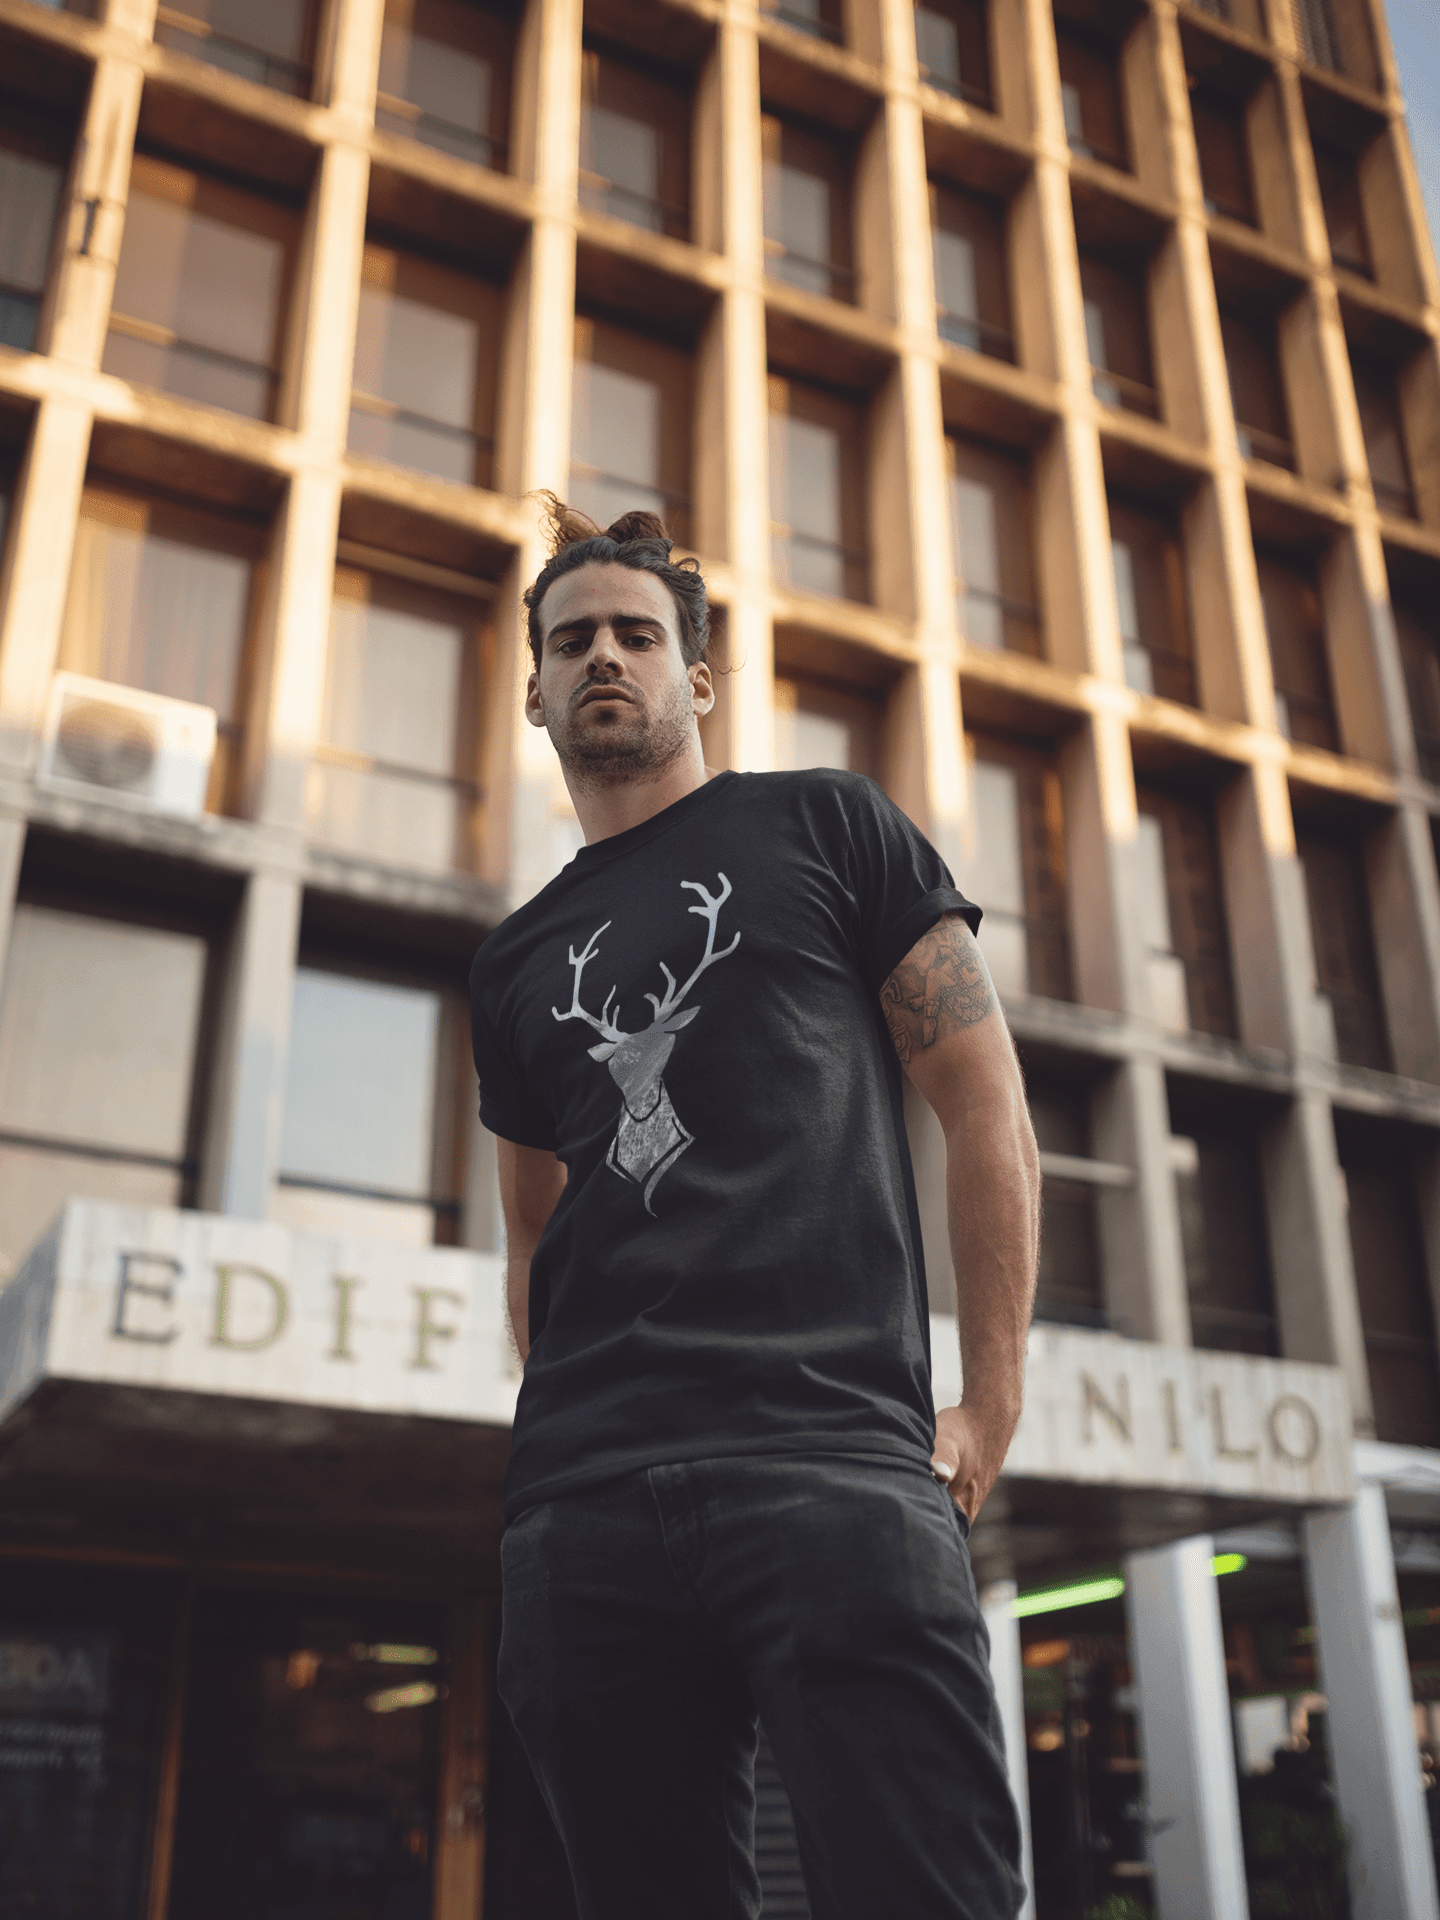 Buck Deer Graphic Short-Sleeve Men Women Unisex T-Shirt Tee Tees A Moment Of Now Women’s Boutique Clothing Online Lifestyle Store